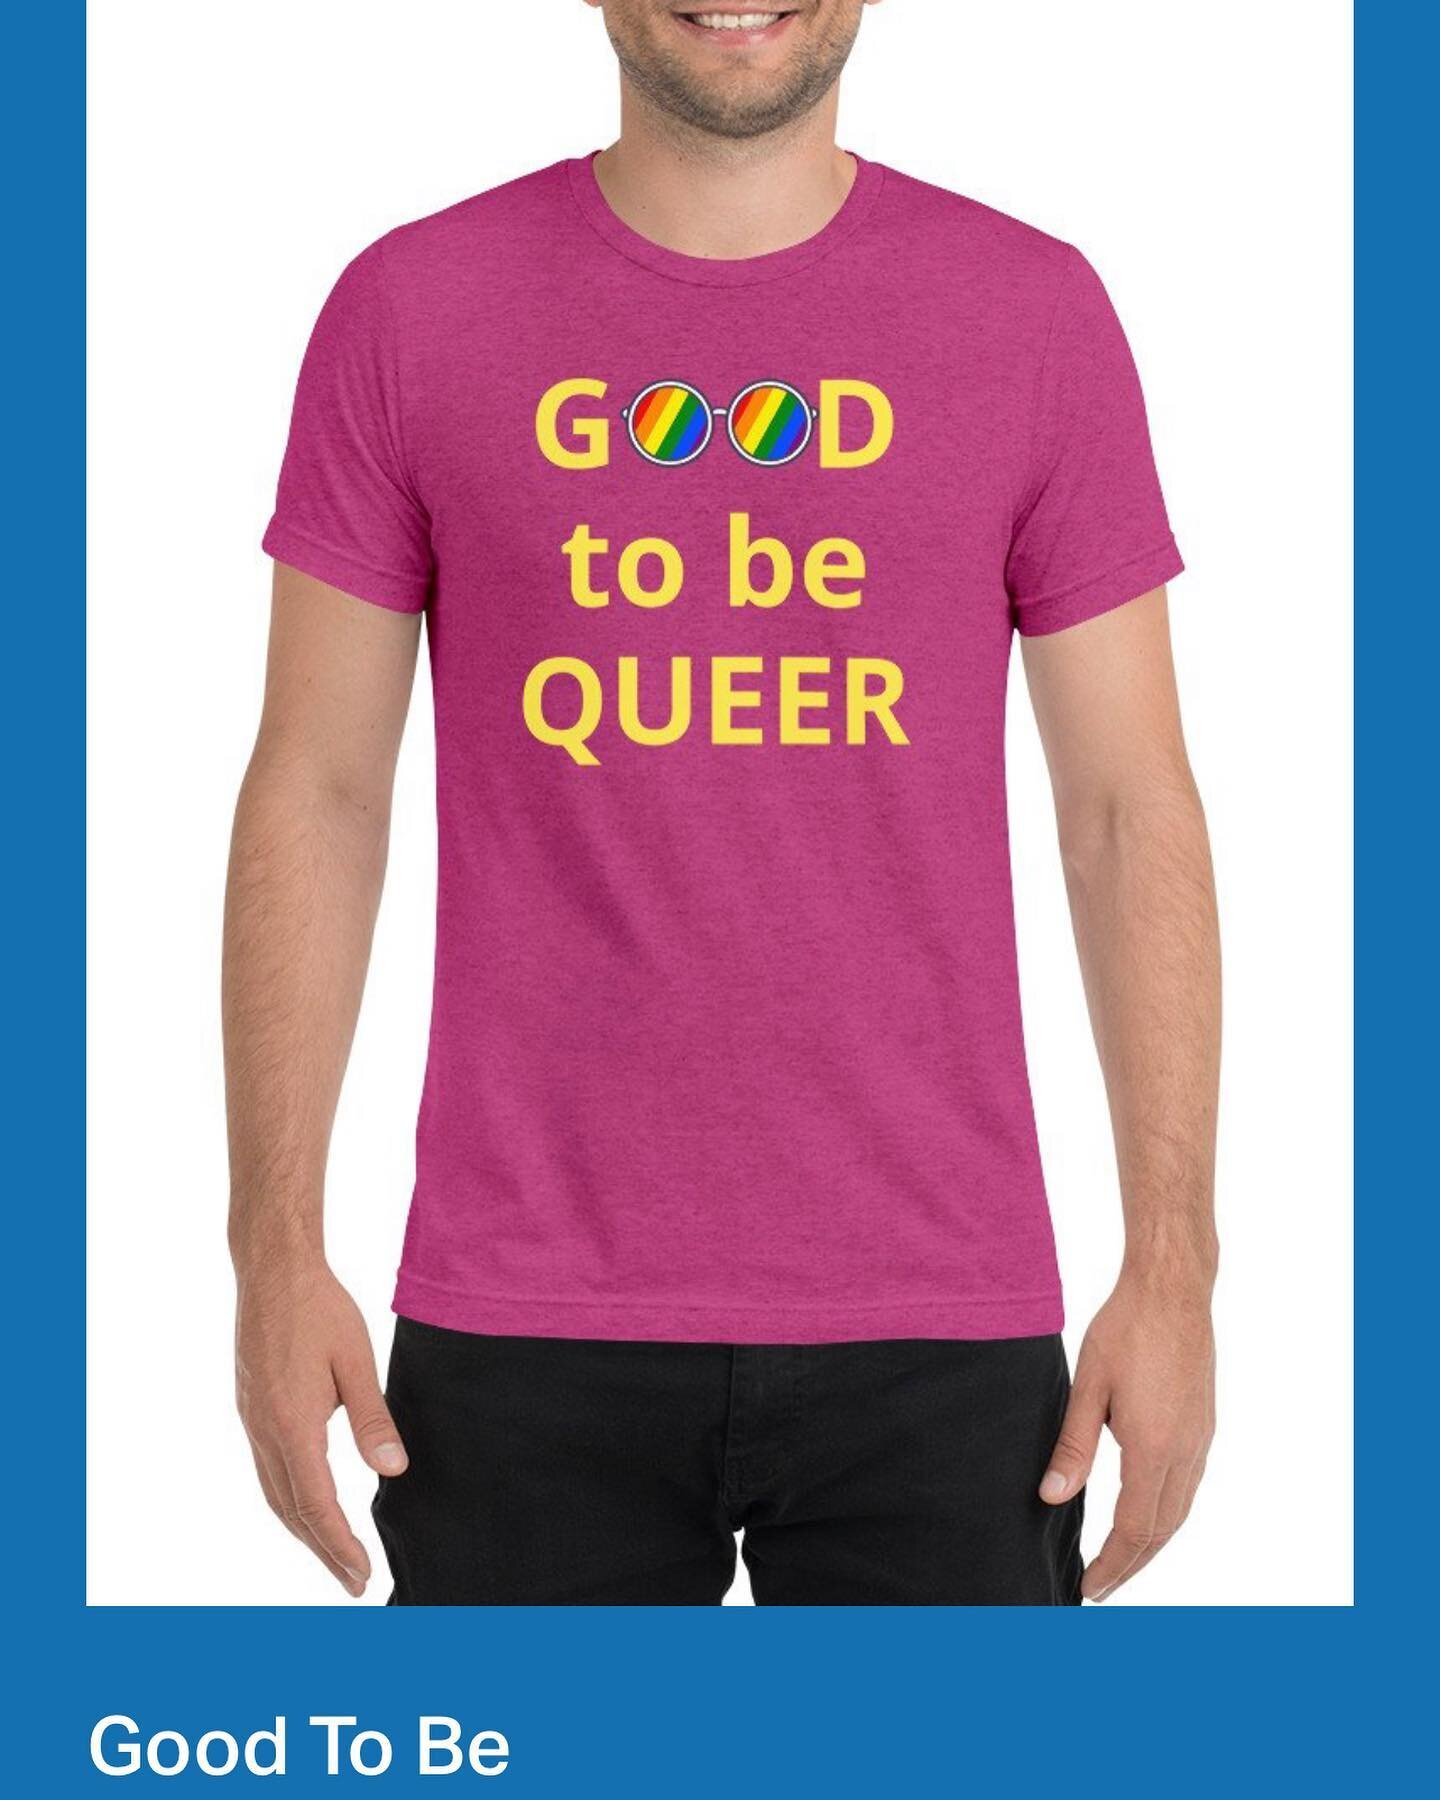 🏳️&zwj;🌈Queers are everywhere! 🏳️&zwj;🌈#pride #pridemonth #lgbt #queer #tshirt #smallbusiness